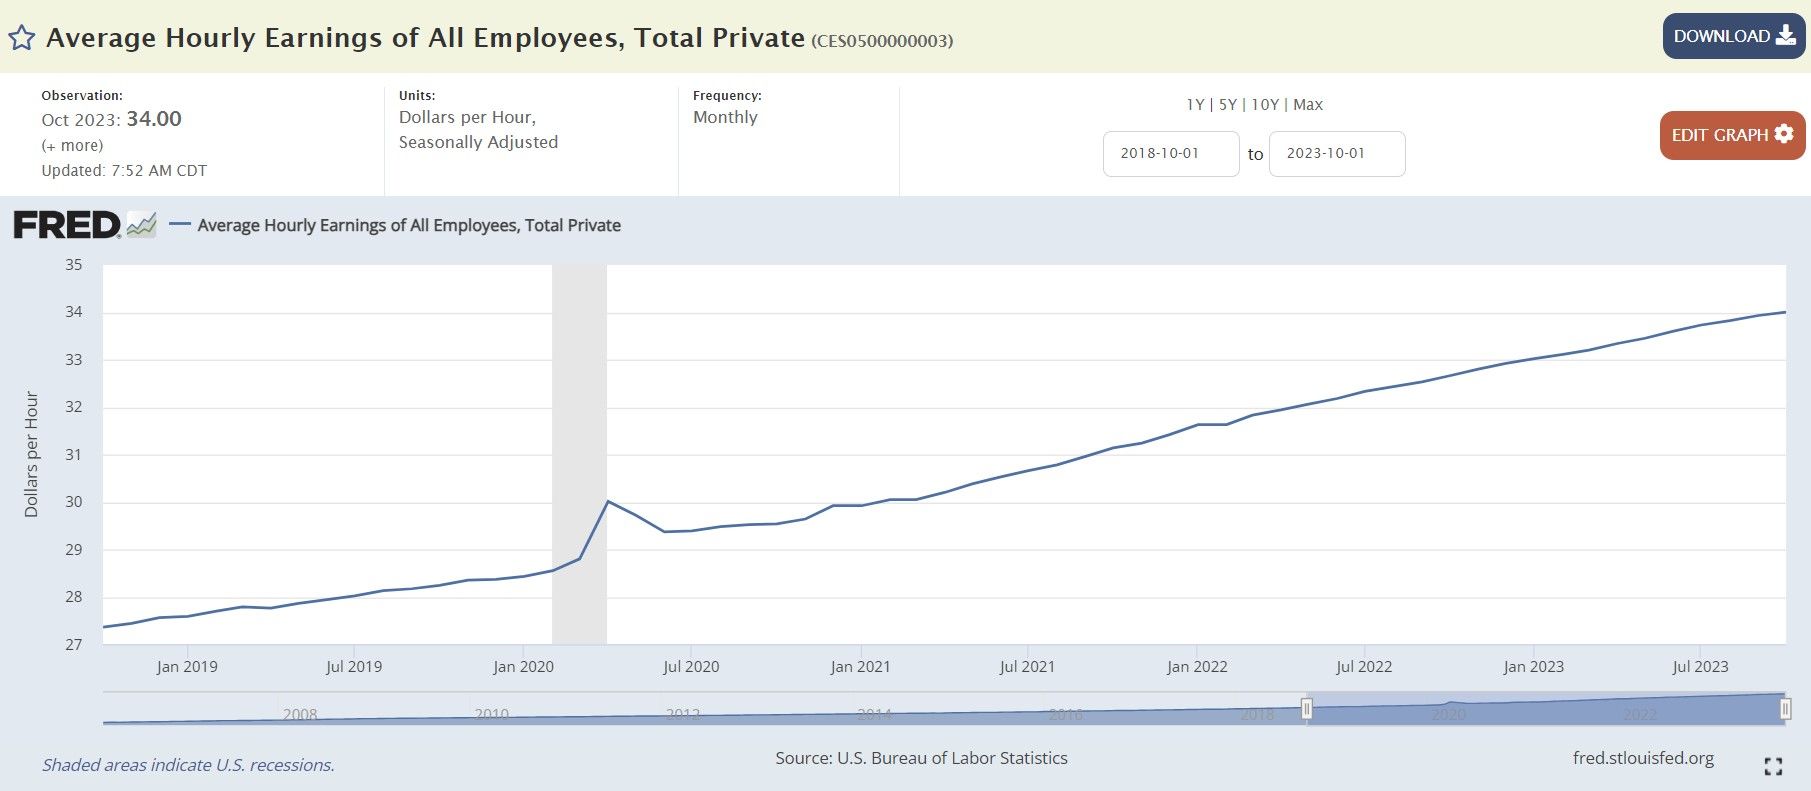 Average Hourly Earnings of All Employees, Total Private